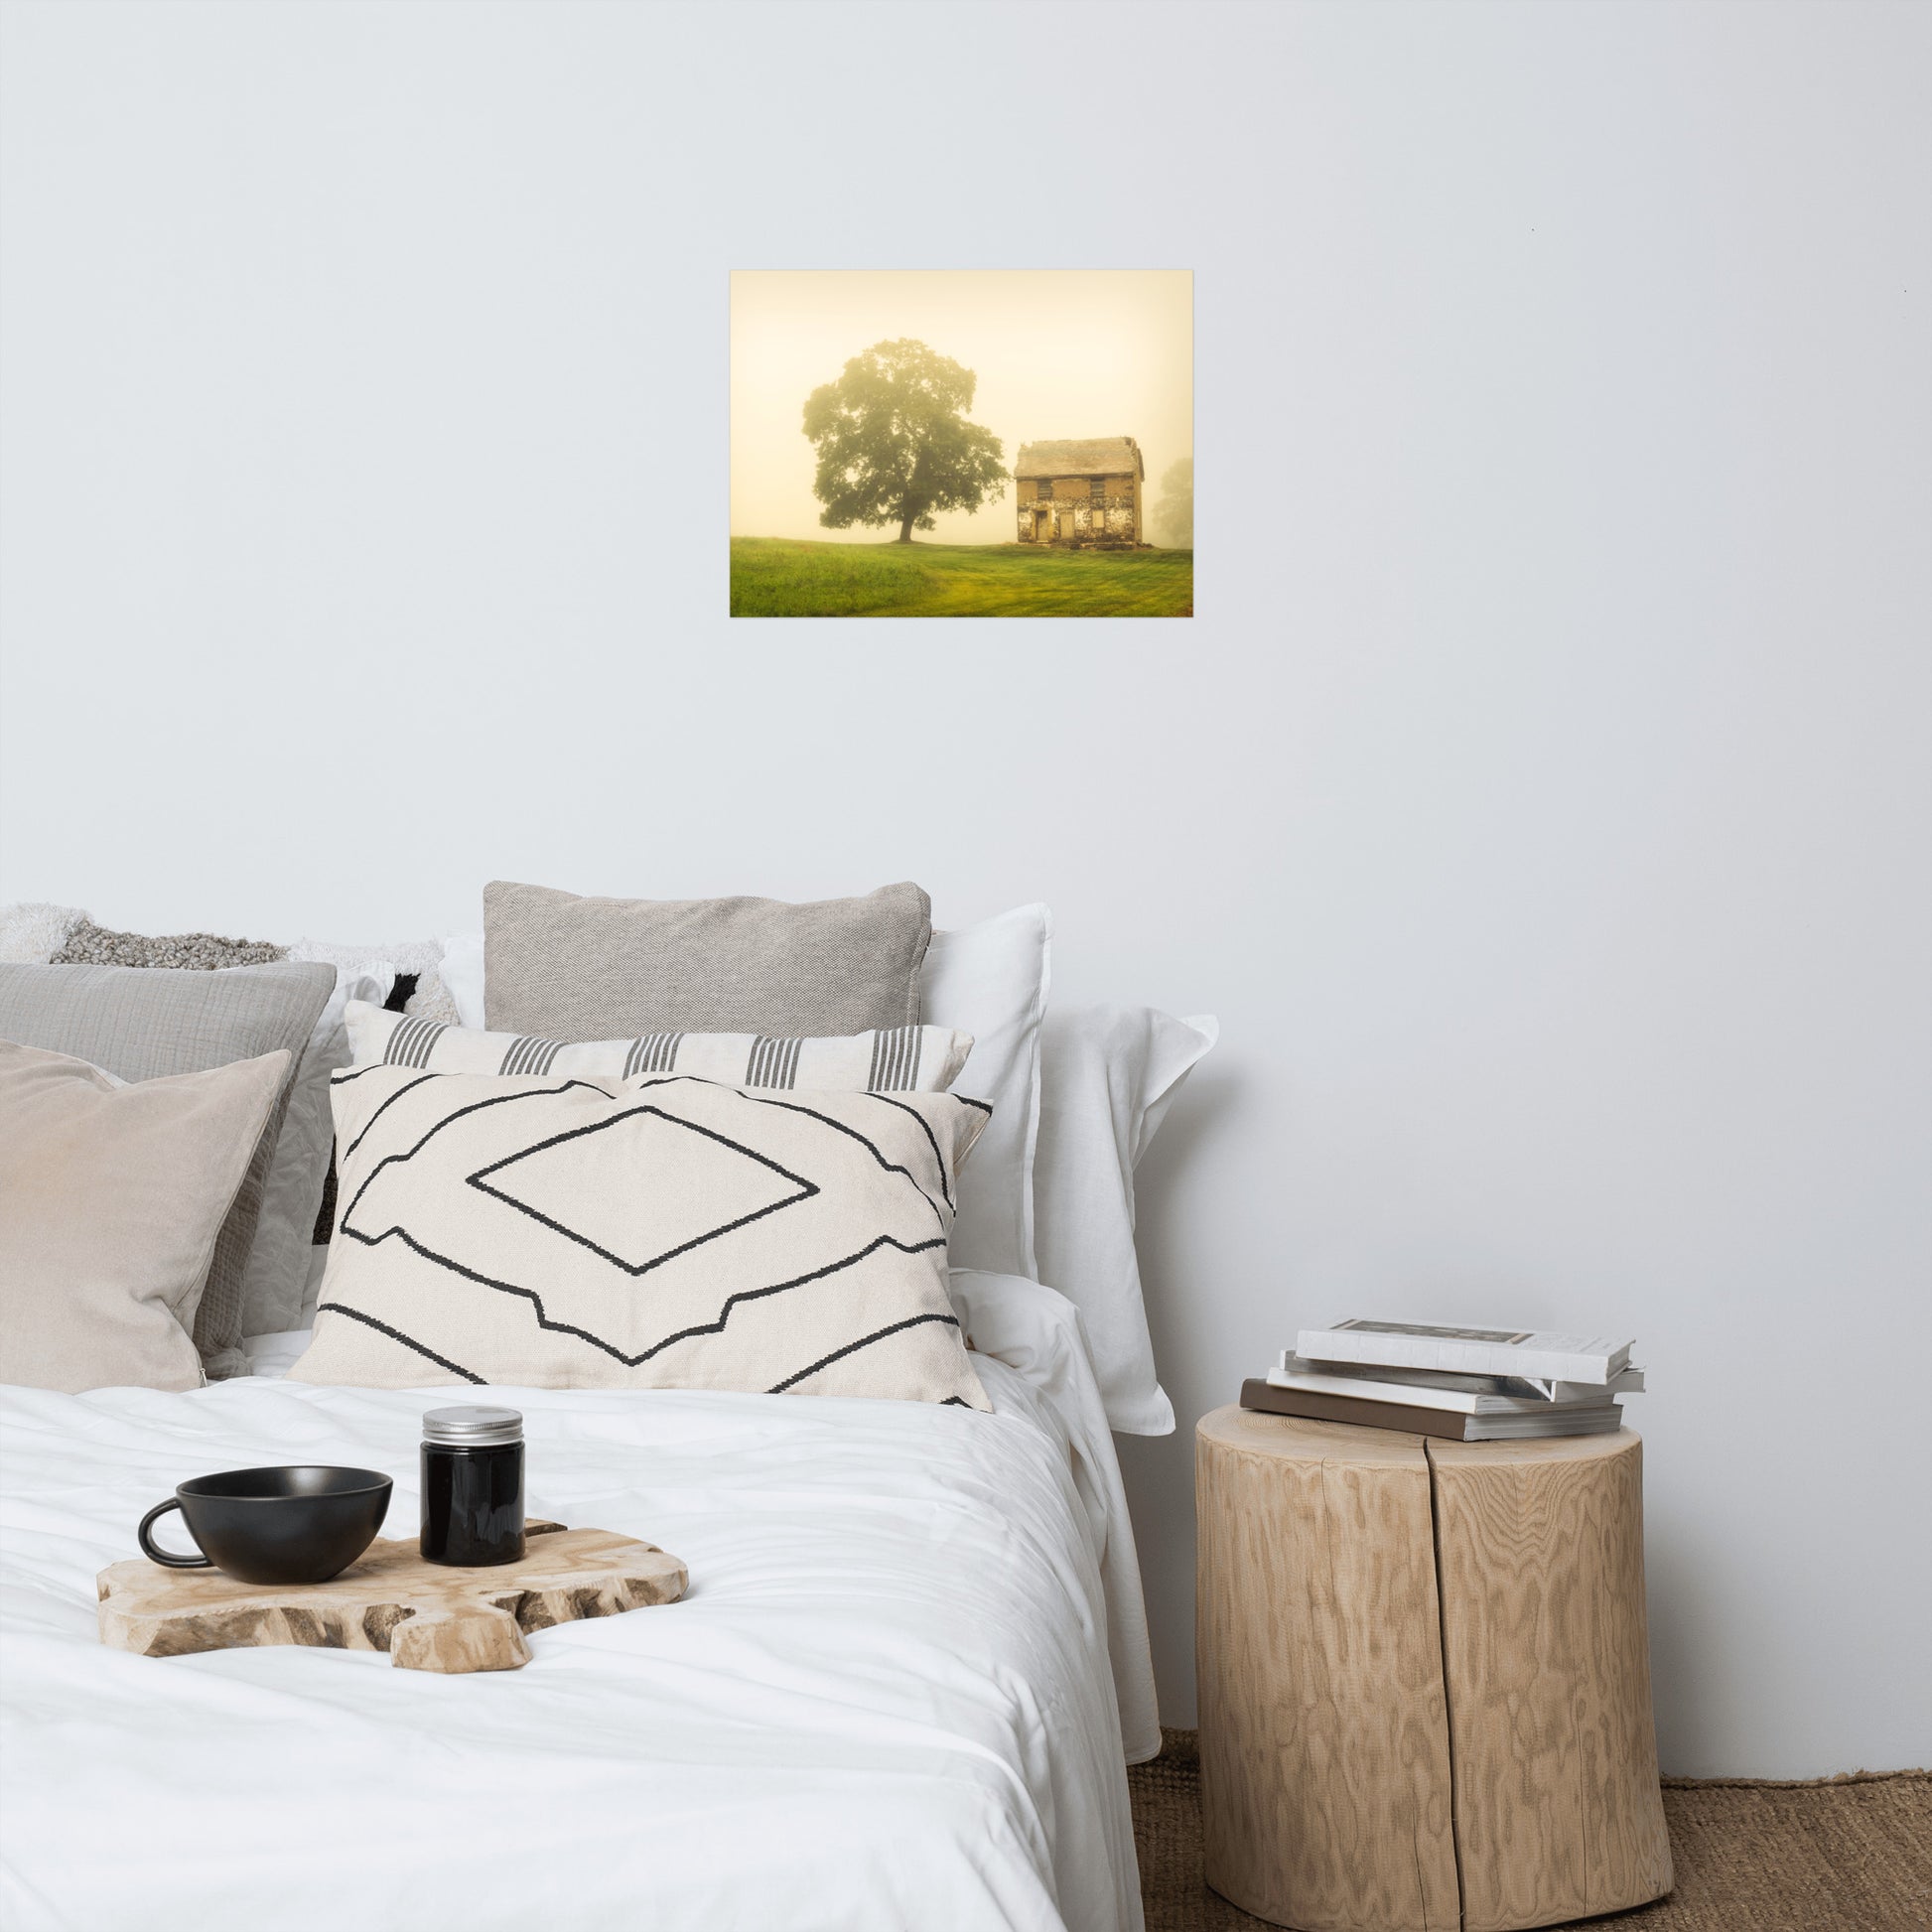 Country Bedroom Wall Decor: Old Farmhouse in Foggy Meadow Rustic - Rural / Country Style Landscape / Nature Photograph Loose / Unframed / Frameless / Frameable Wall Art Print - Artwork